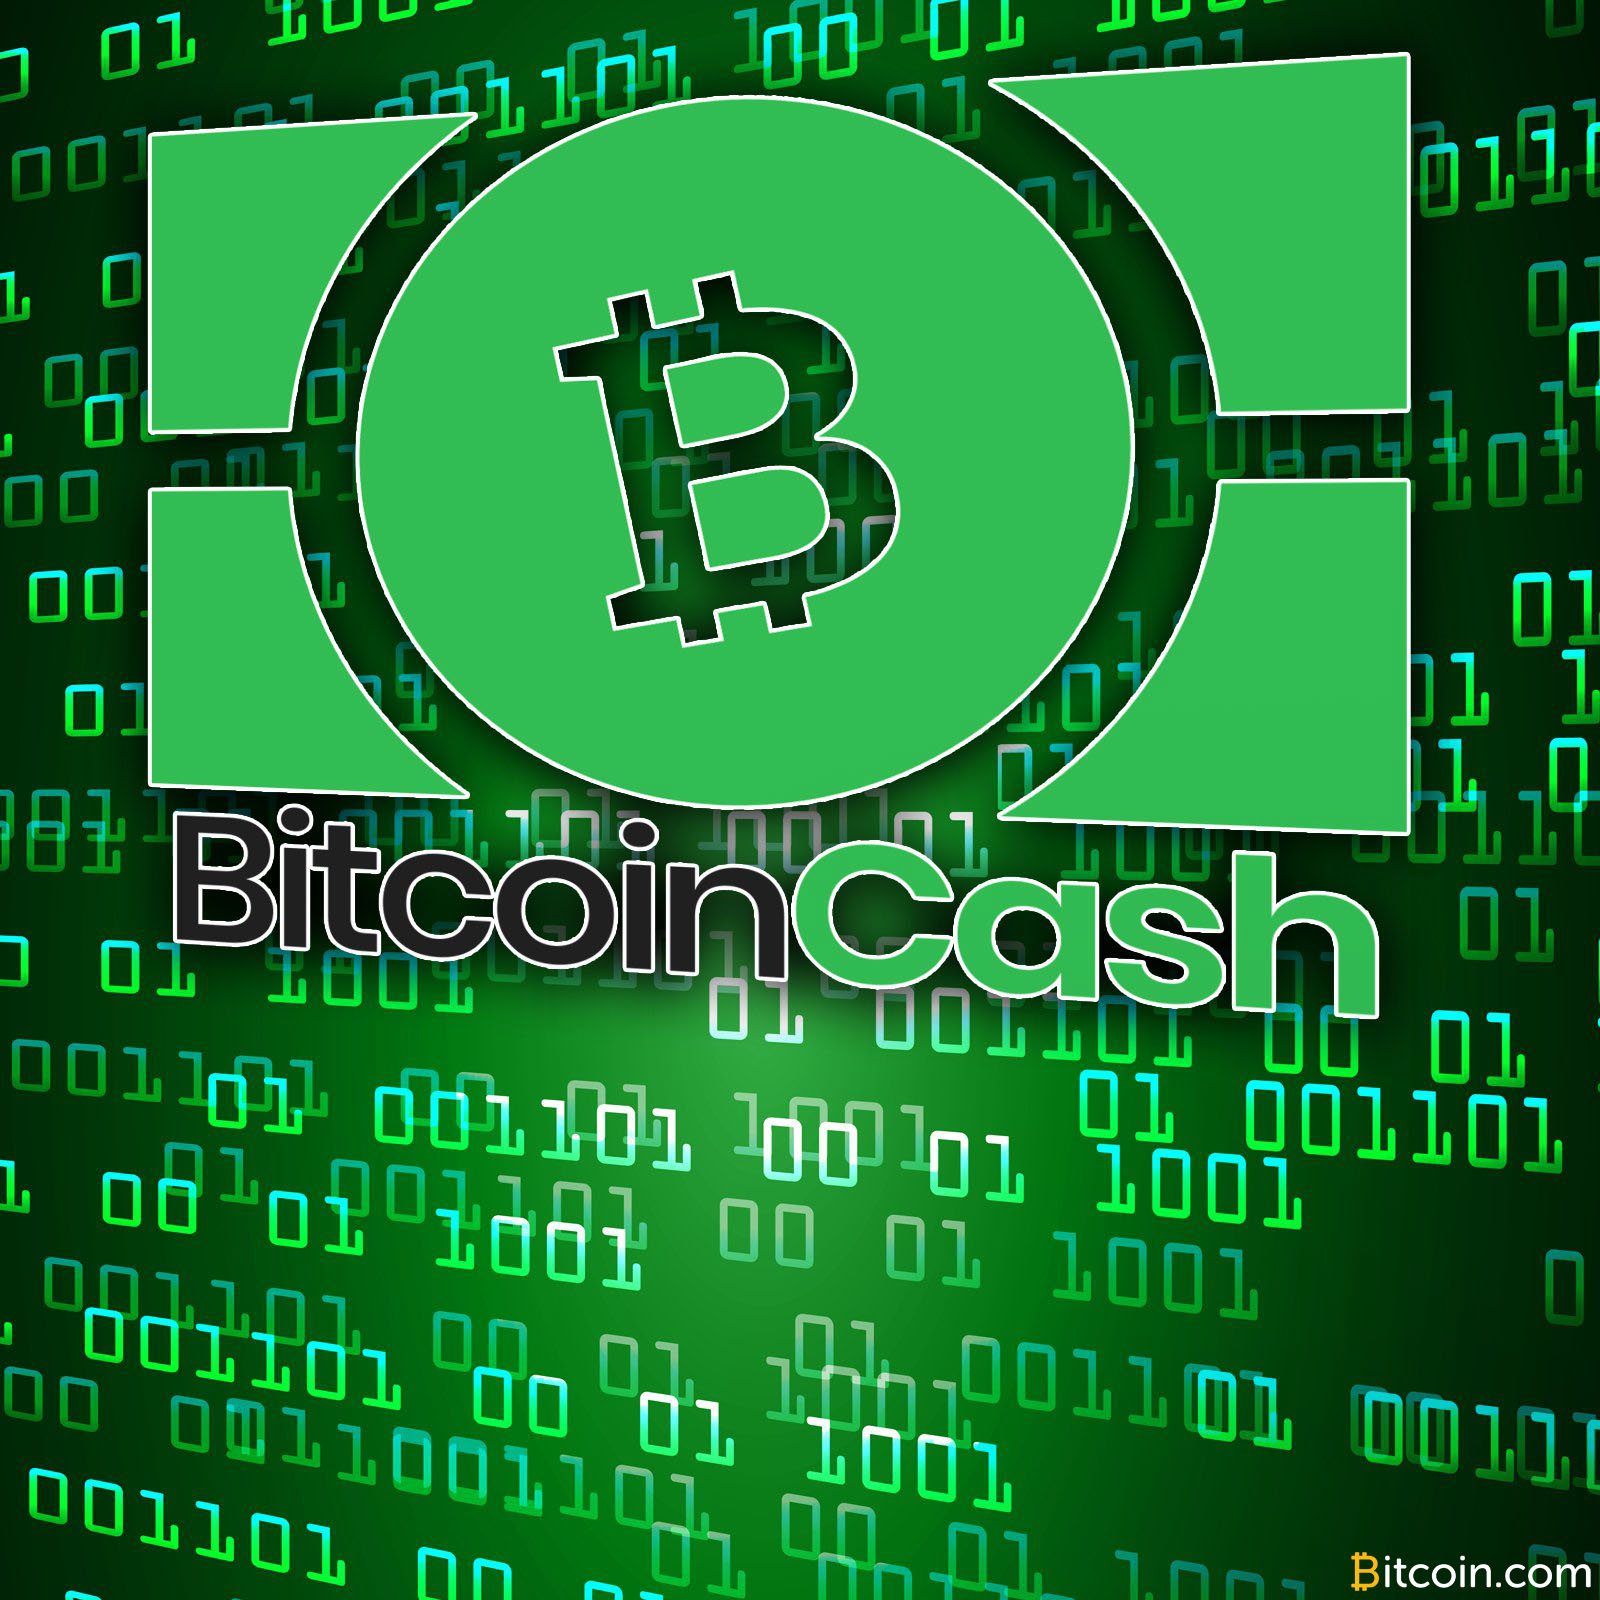 Bitcoin Cash Sees Significant Support and Adoption Over Four Months